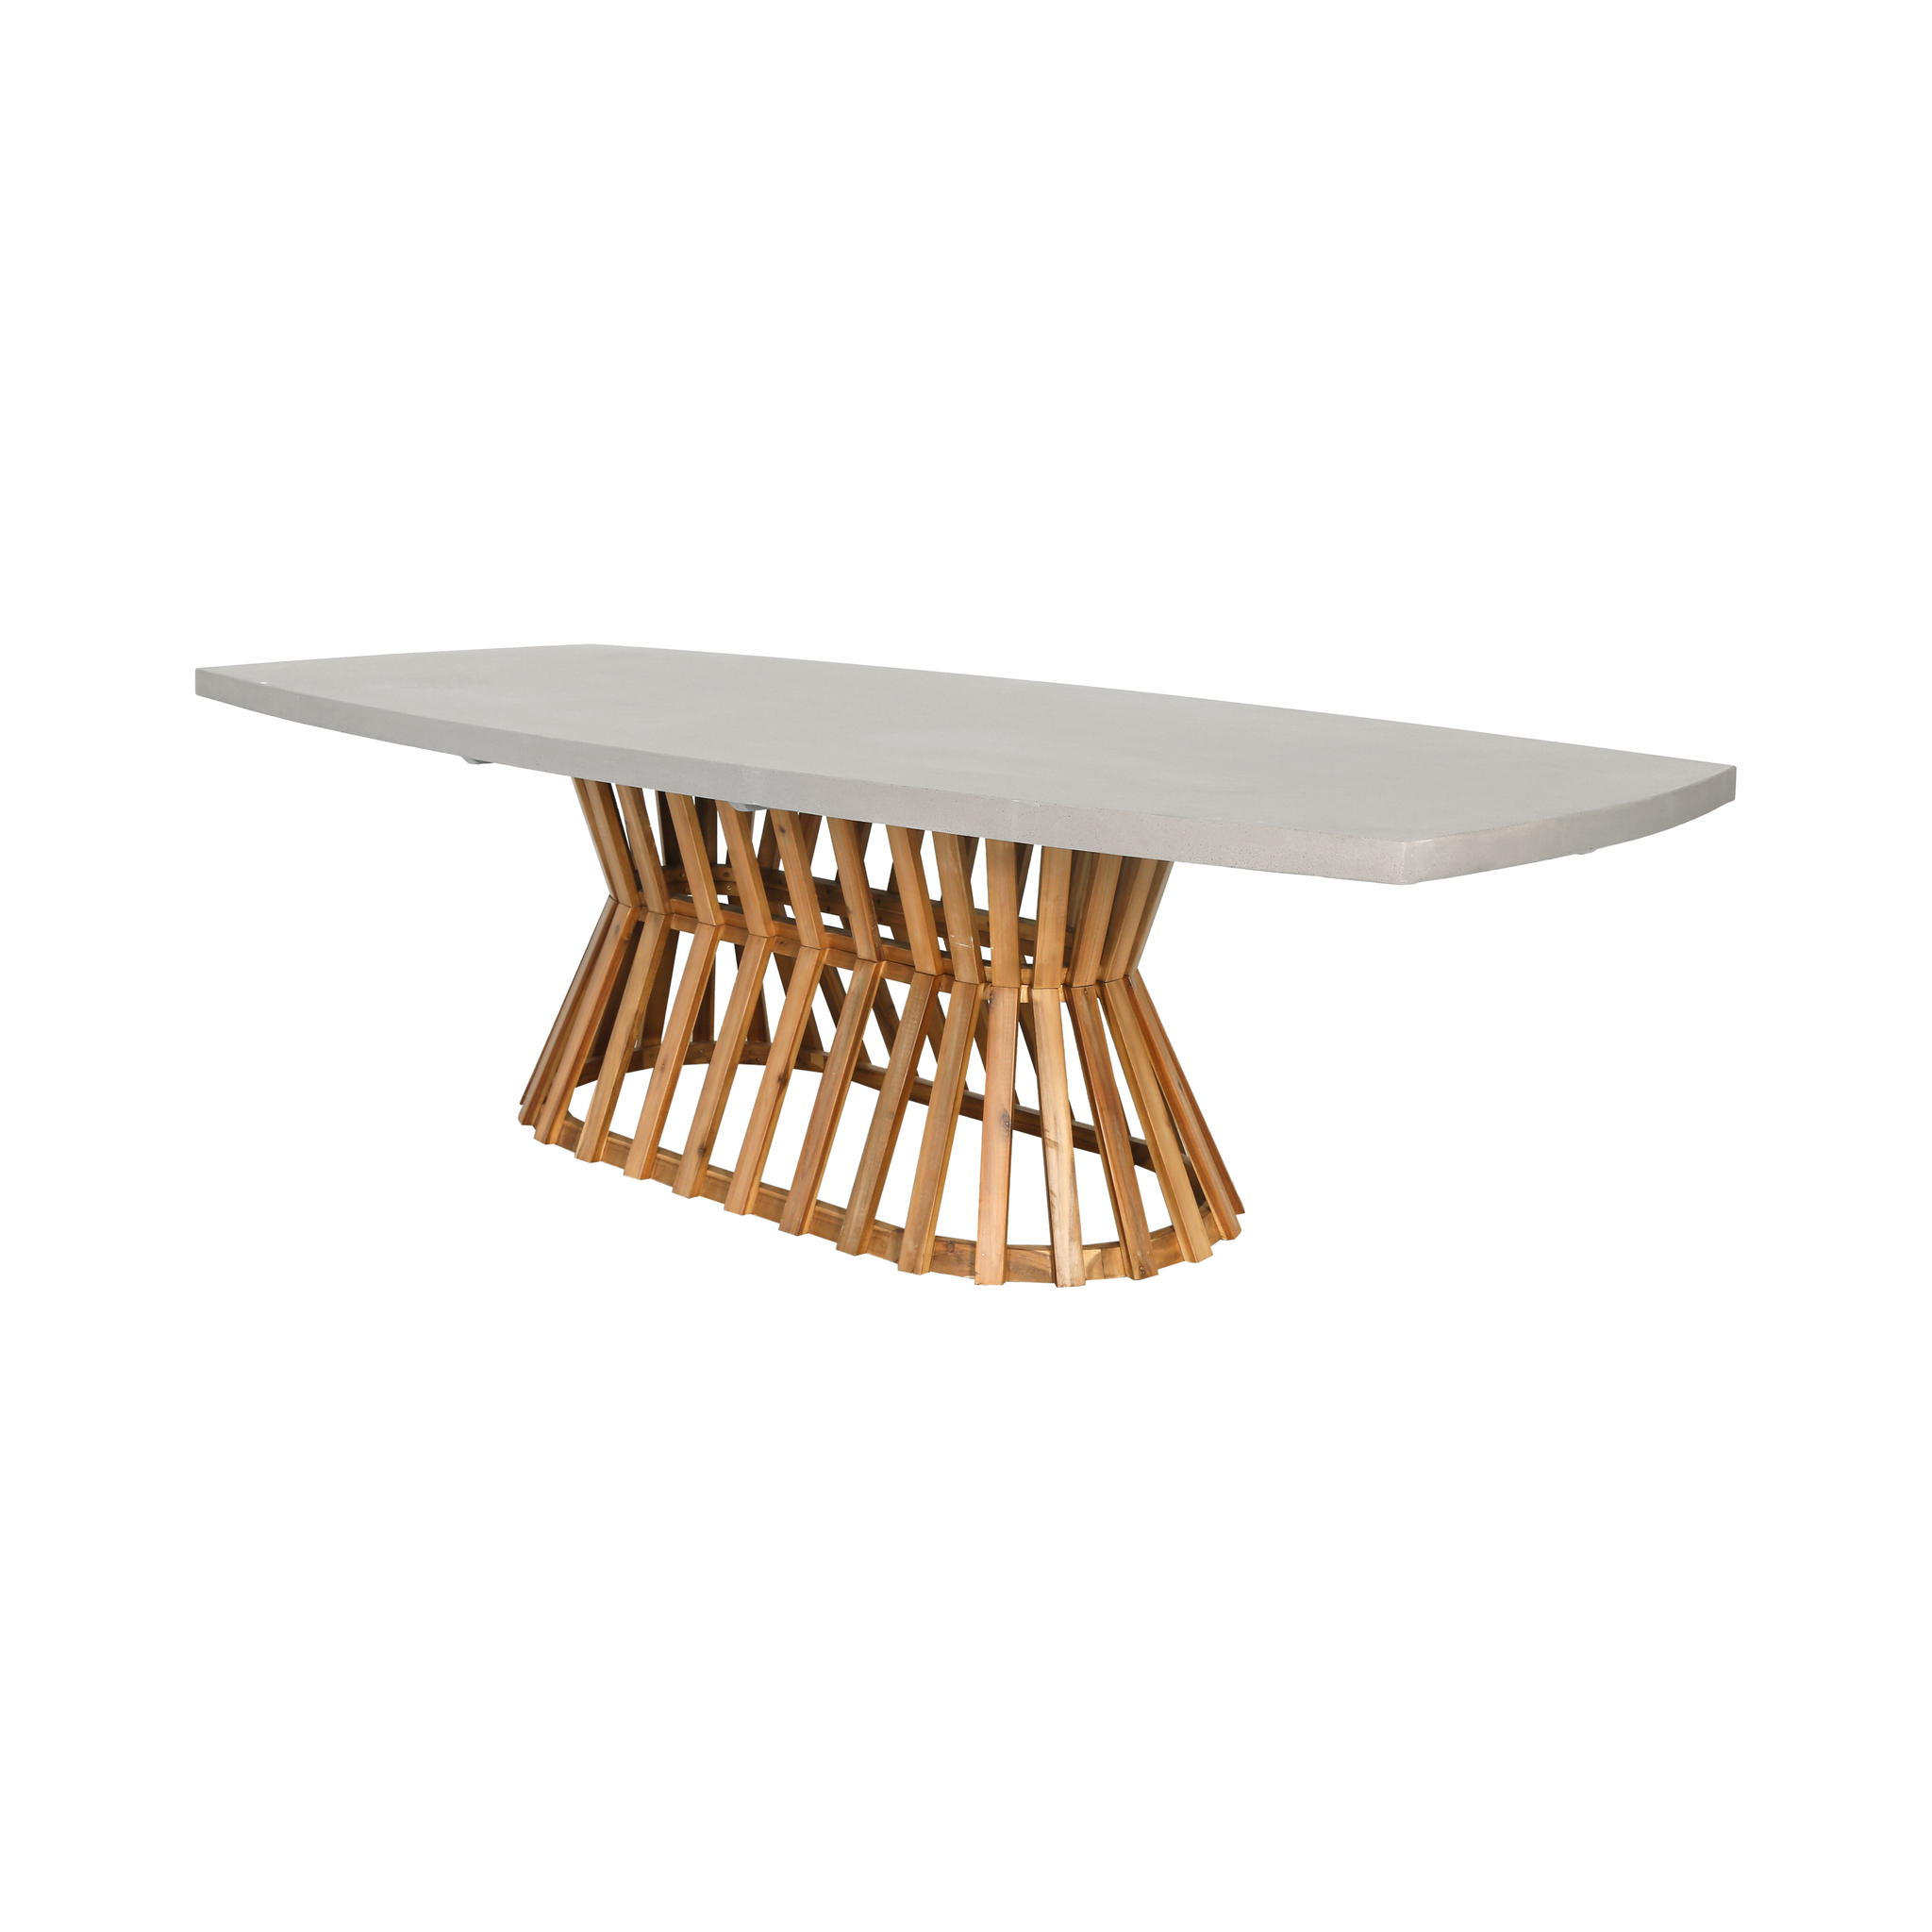 90375 JOINERY Table